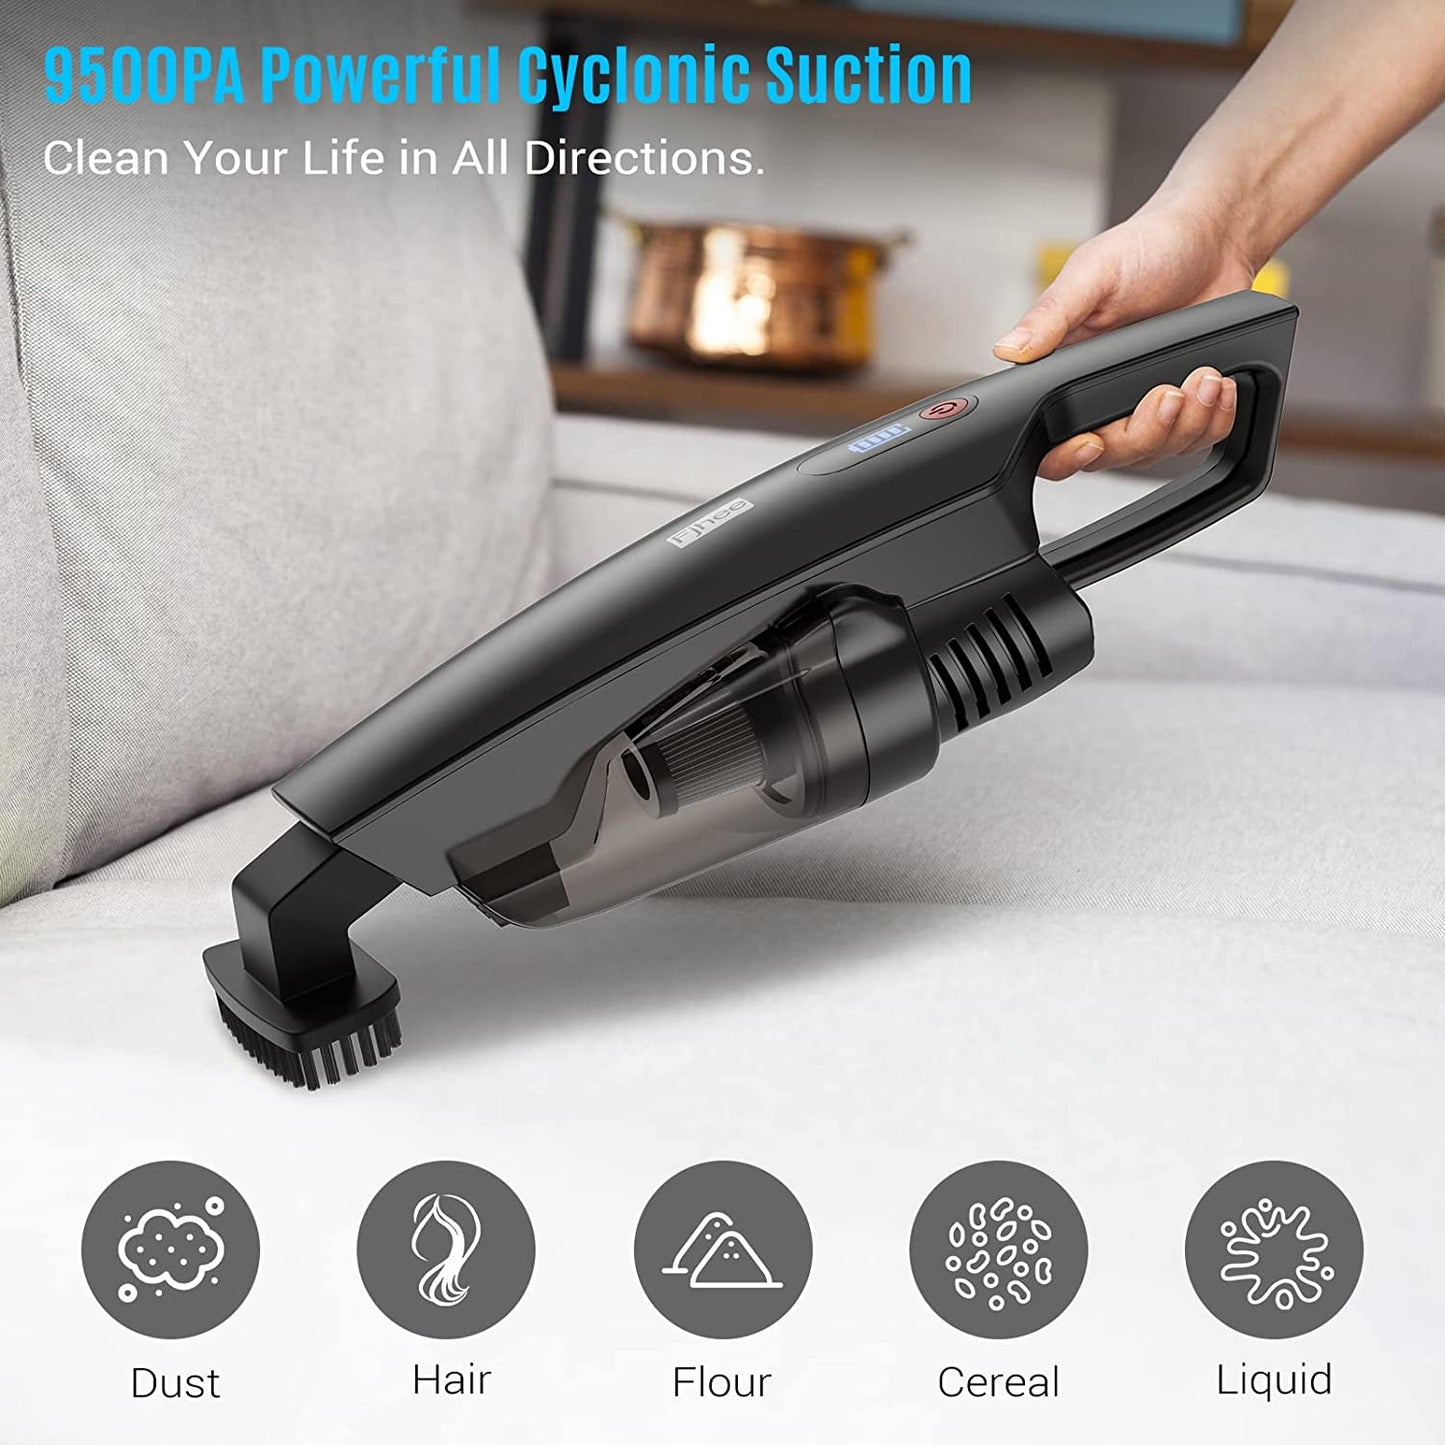 Handheld Vacuum Cordless, 150W High Power Rechargeable Wireless Car Vacuum Cleaner, 9500Pa Strong Suction w/4 Attachments for Home Office Car Pets Hair Cleaning(w/Storage Bag)